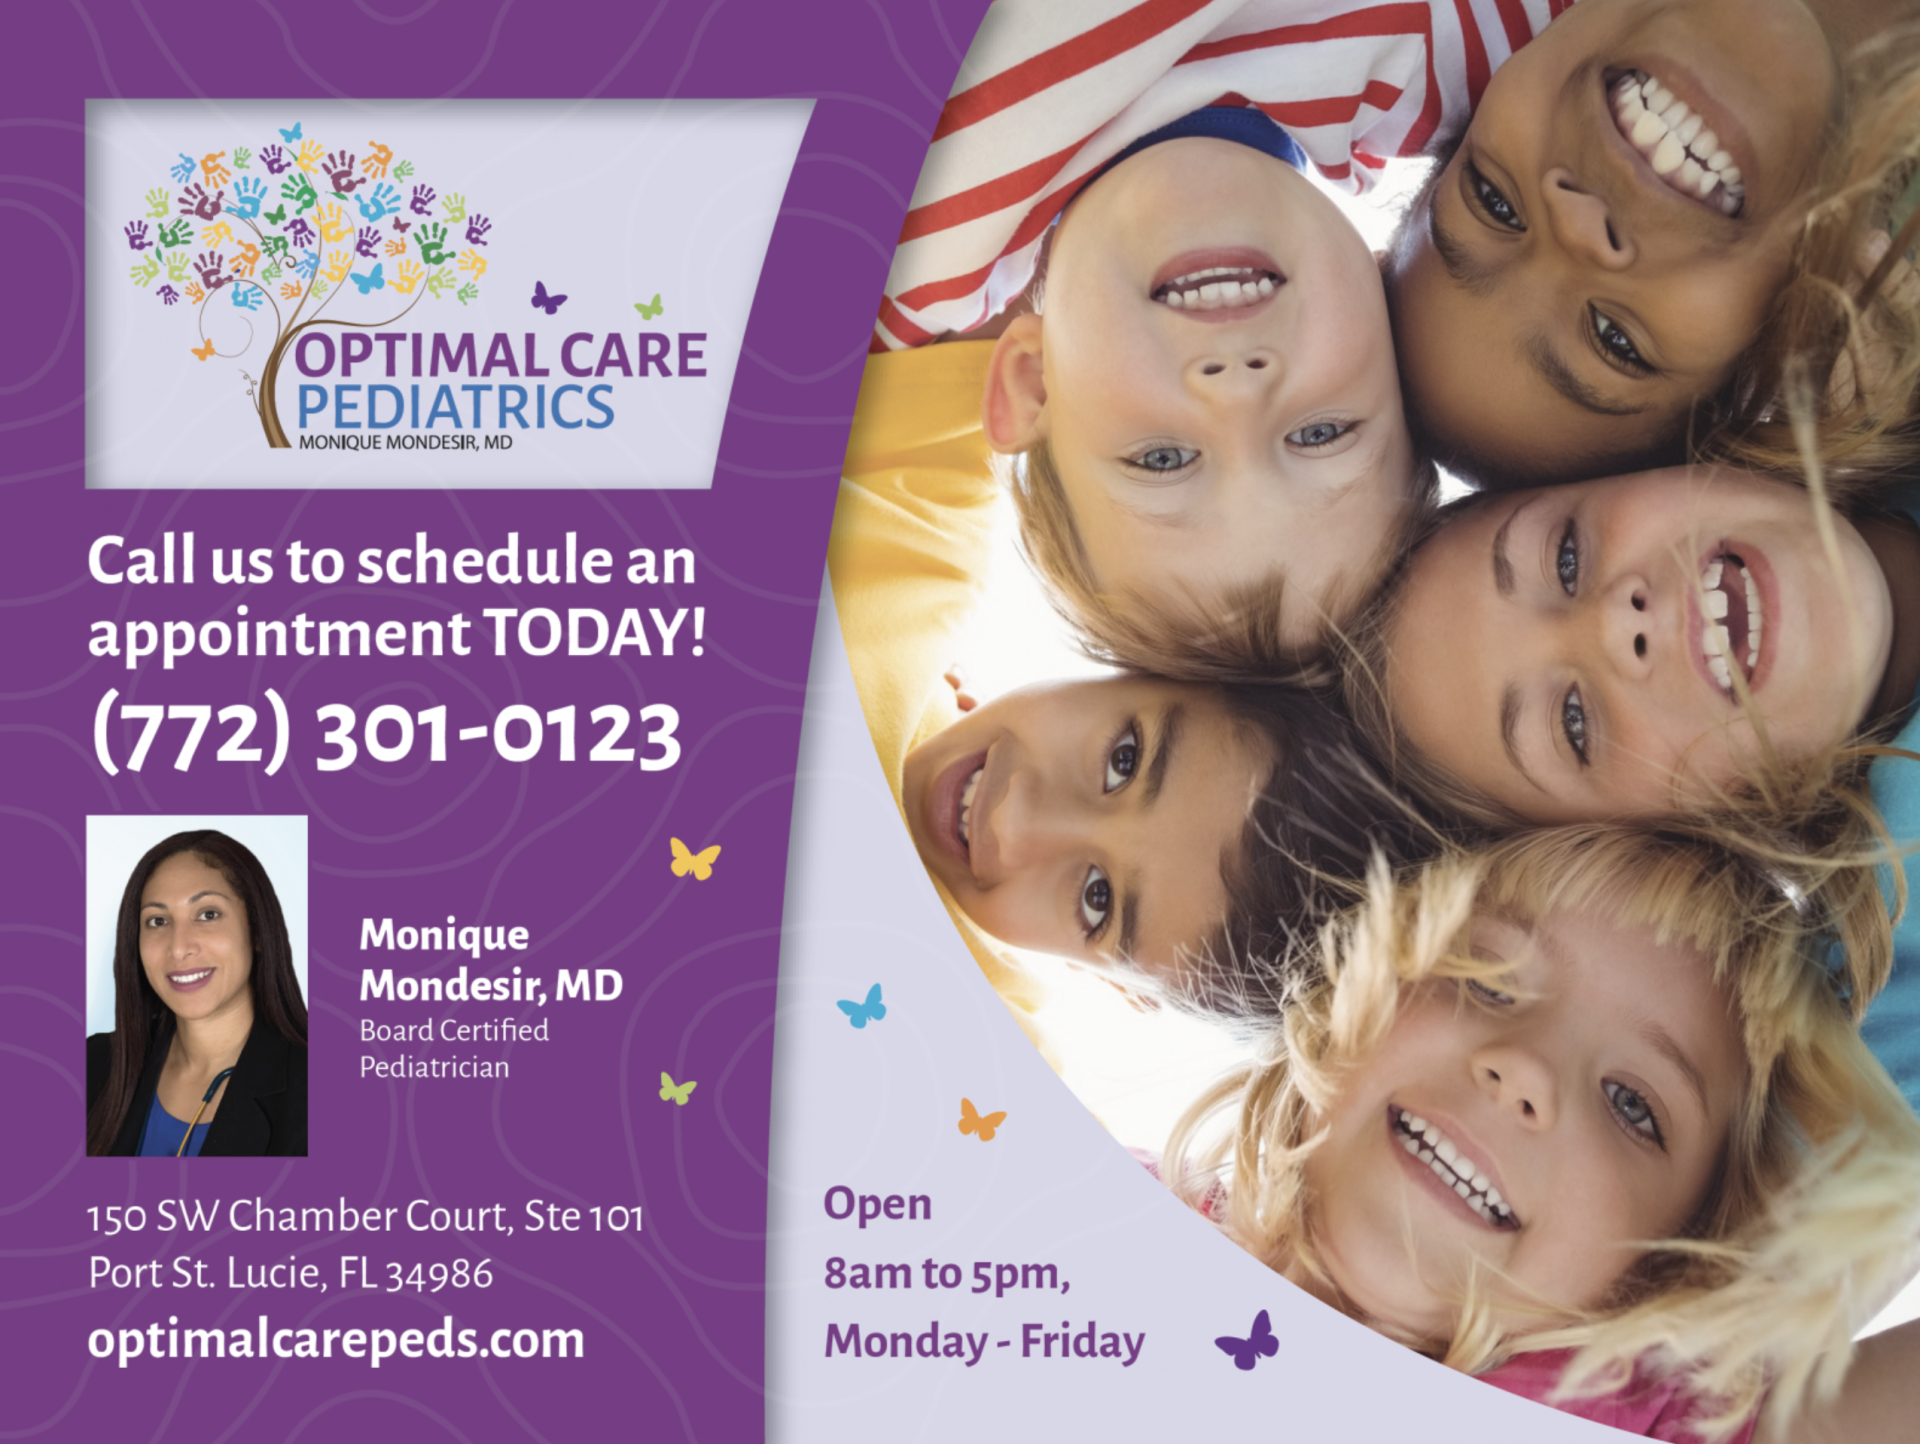 An advertisement for optimal care pediatrics shows a group of children smiling